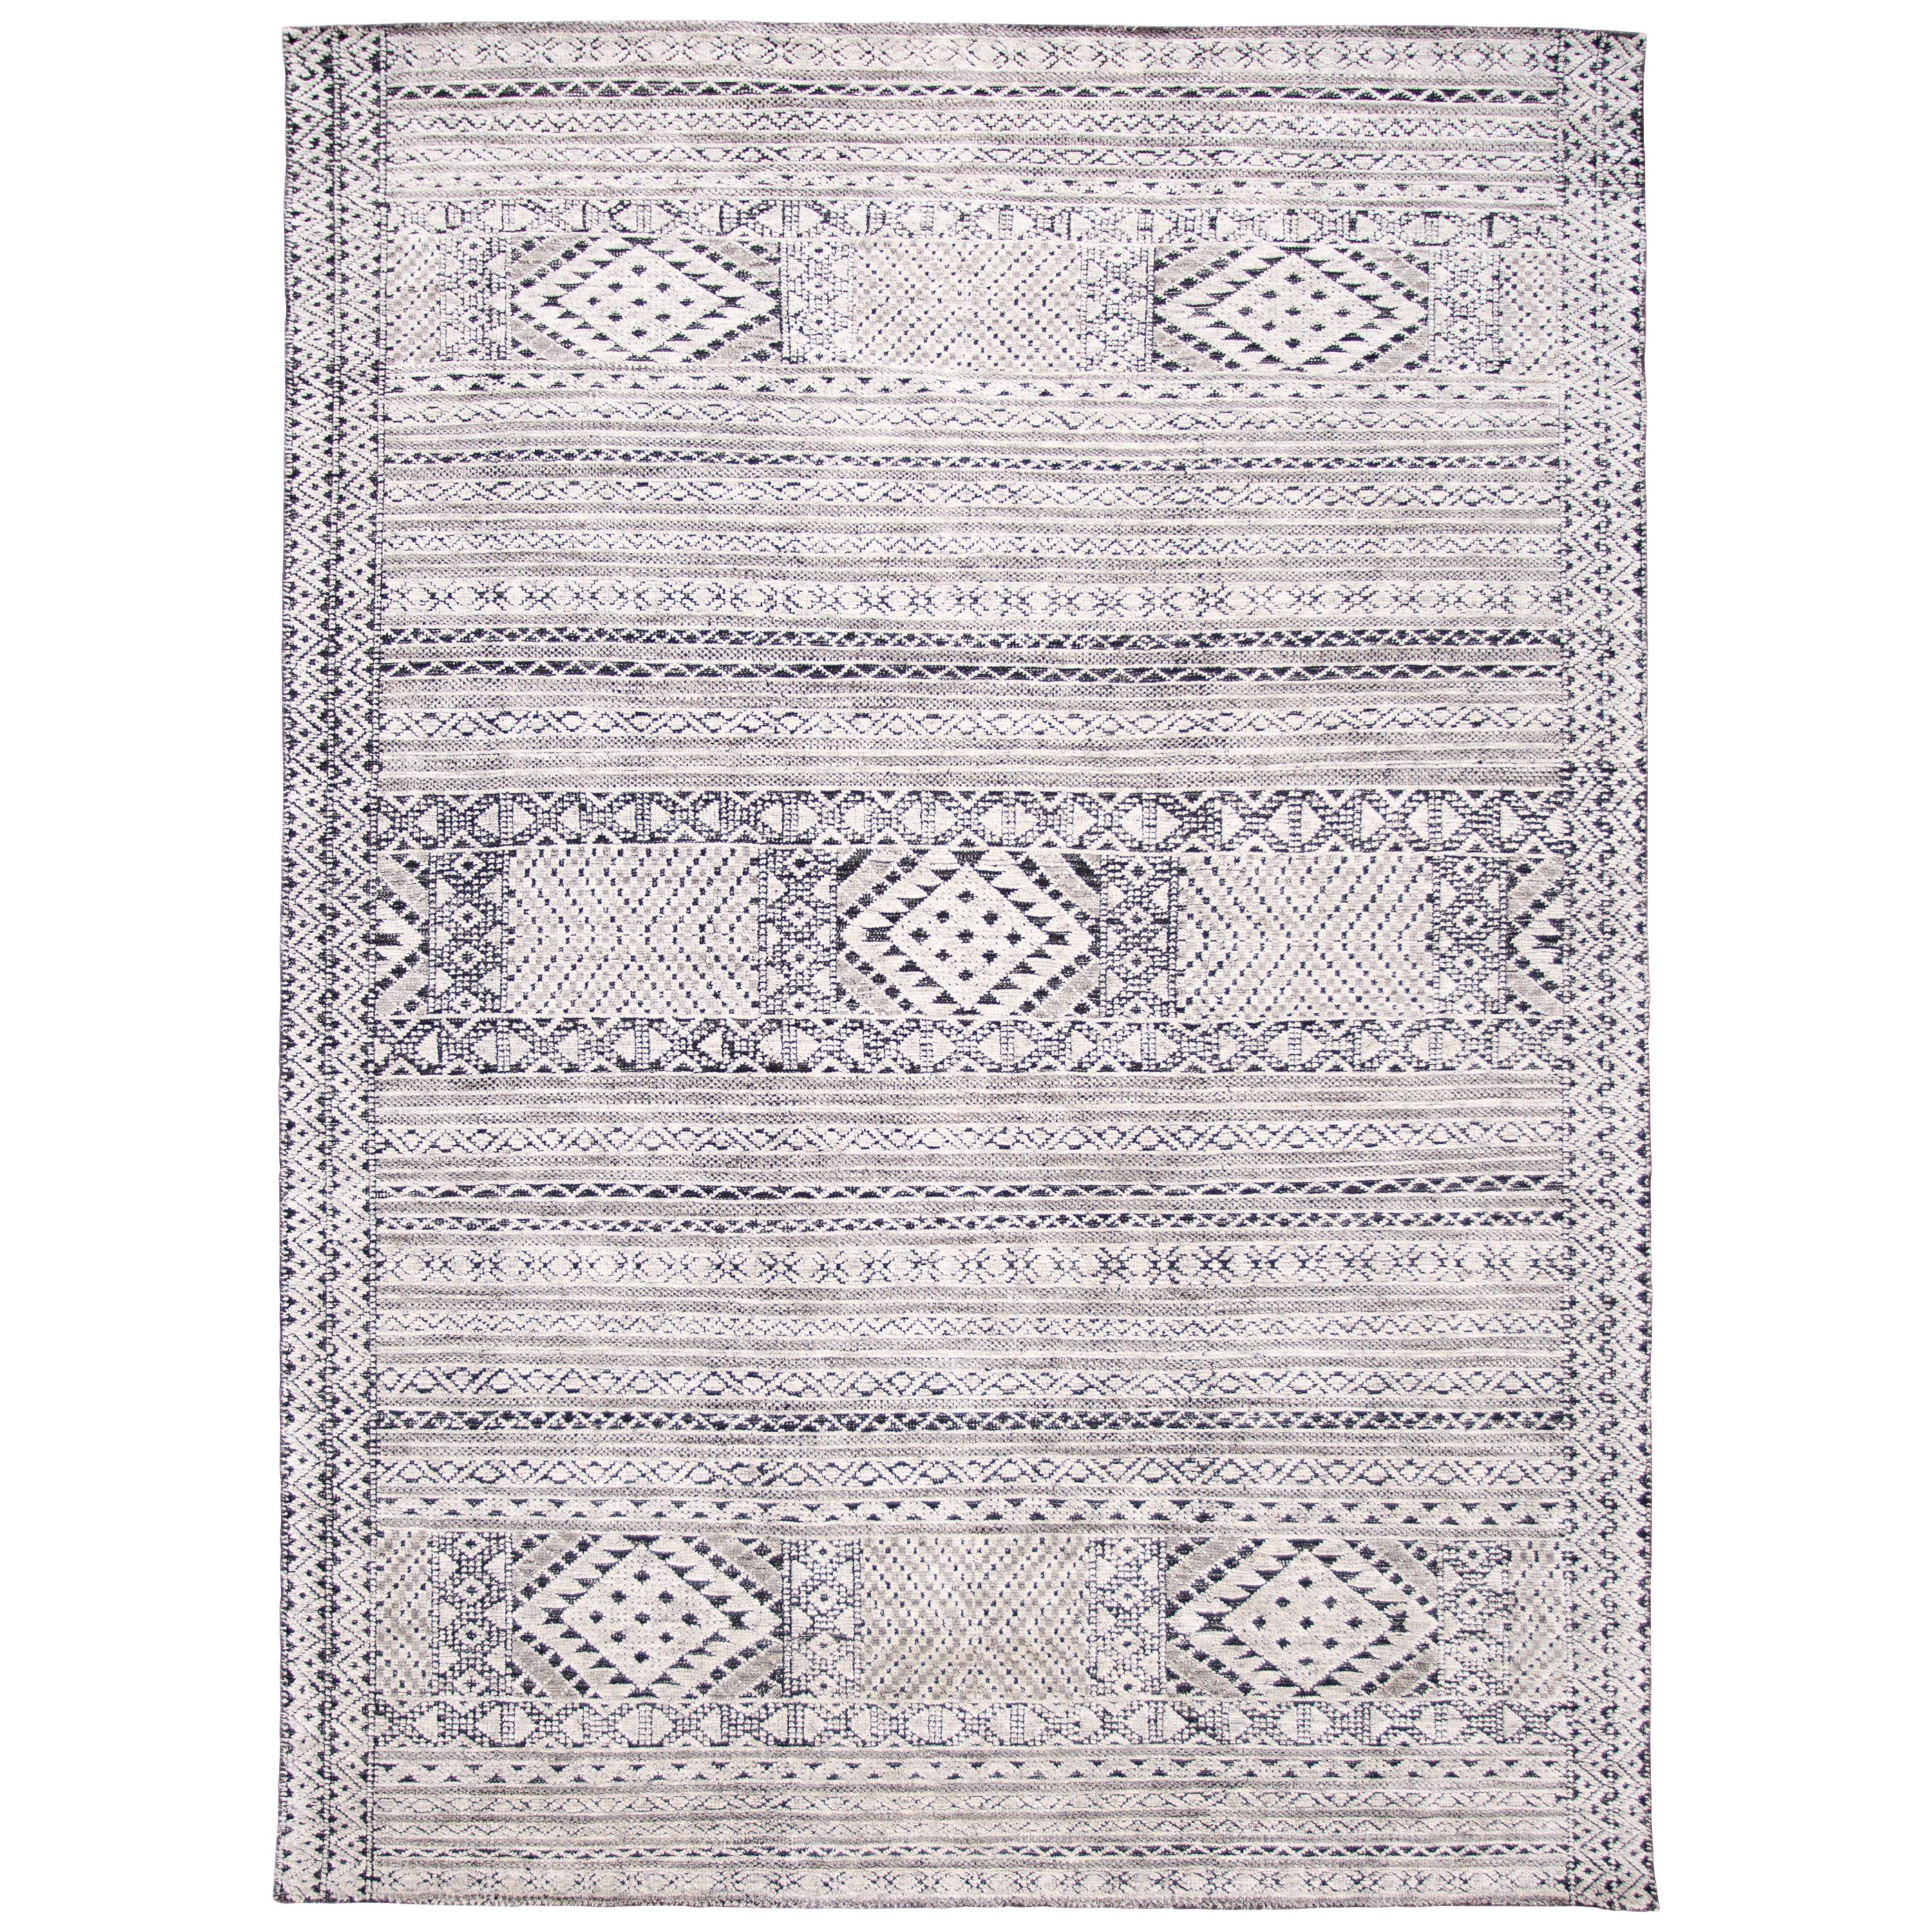 21st Century Contemporary Textured High Low Wool Rug